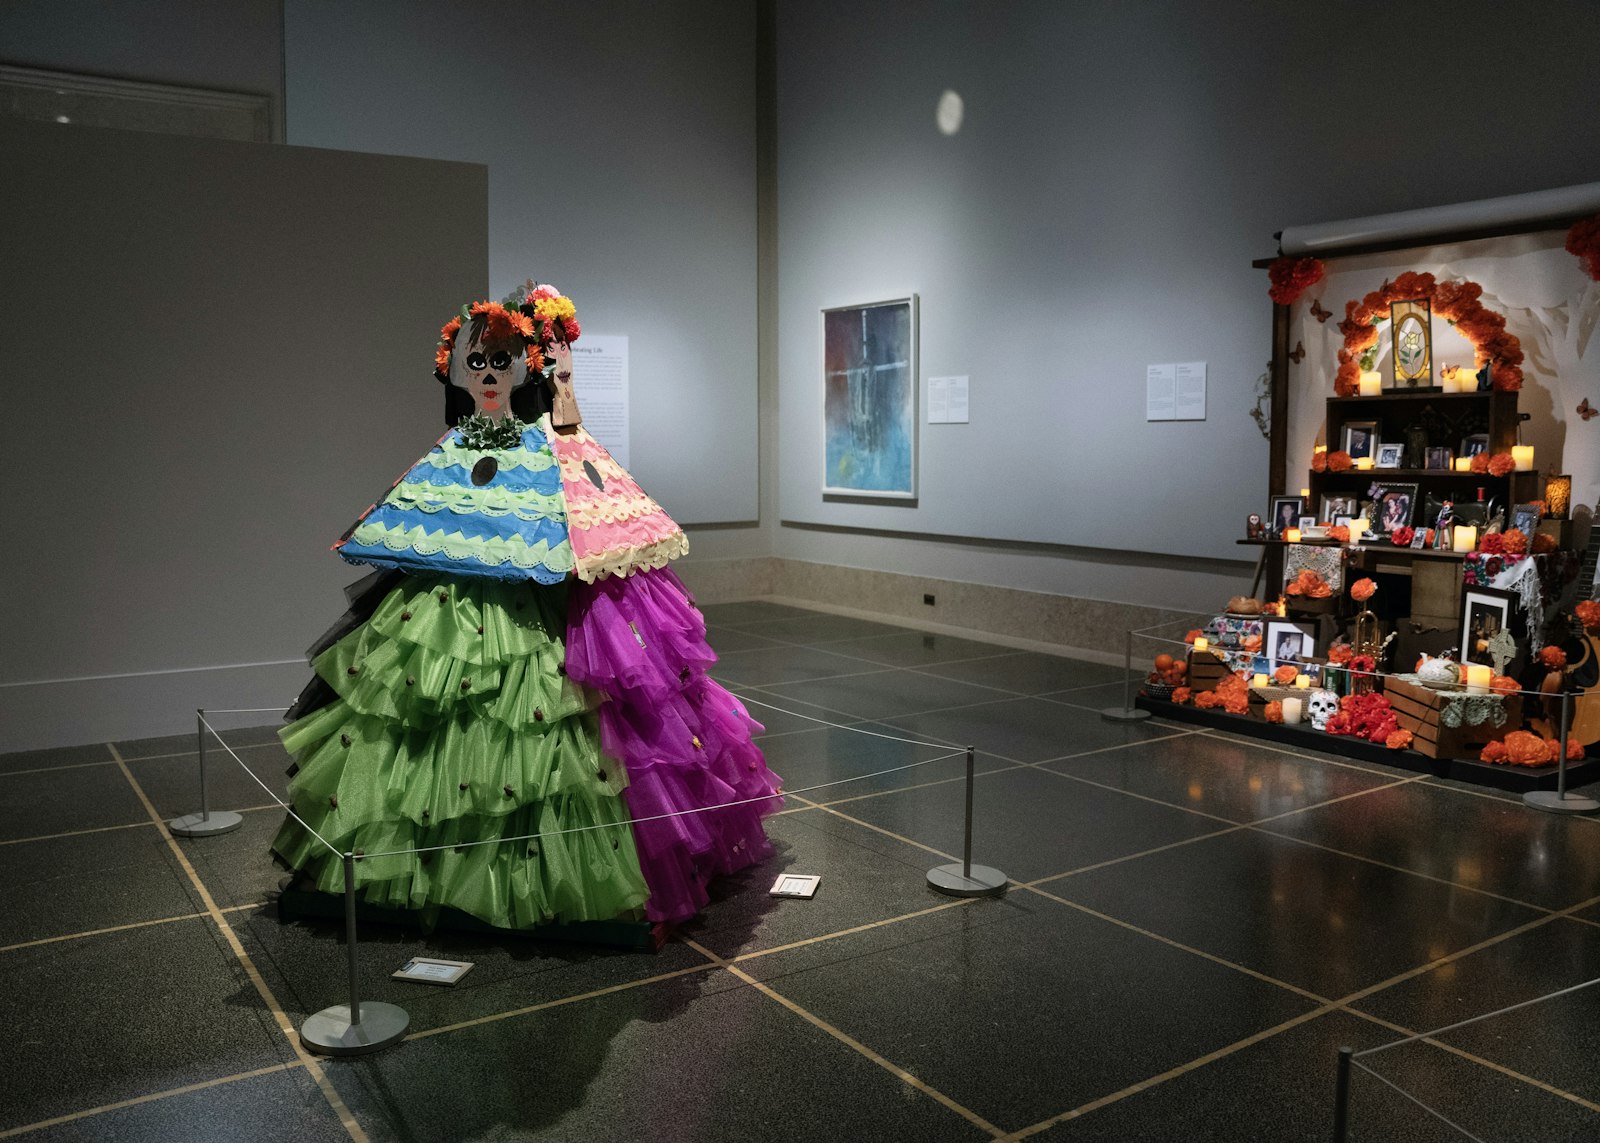 The Regina students' display was among a dozen or so ofrendas chosen to be displayed this year at the Detroit Institute of Arts. It will remain up until Nov. 5.